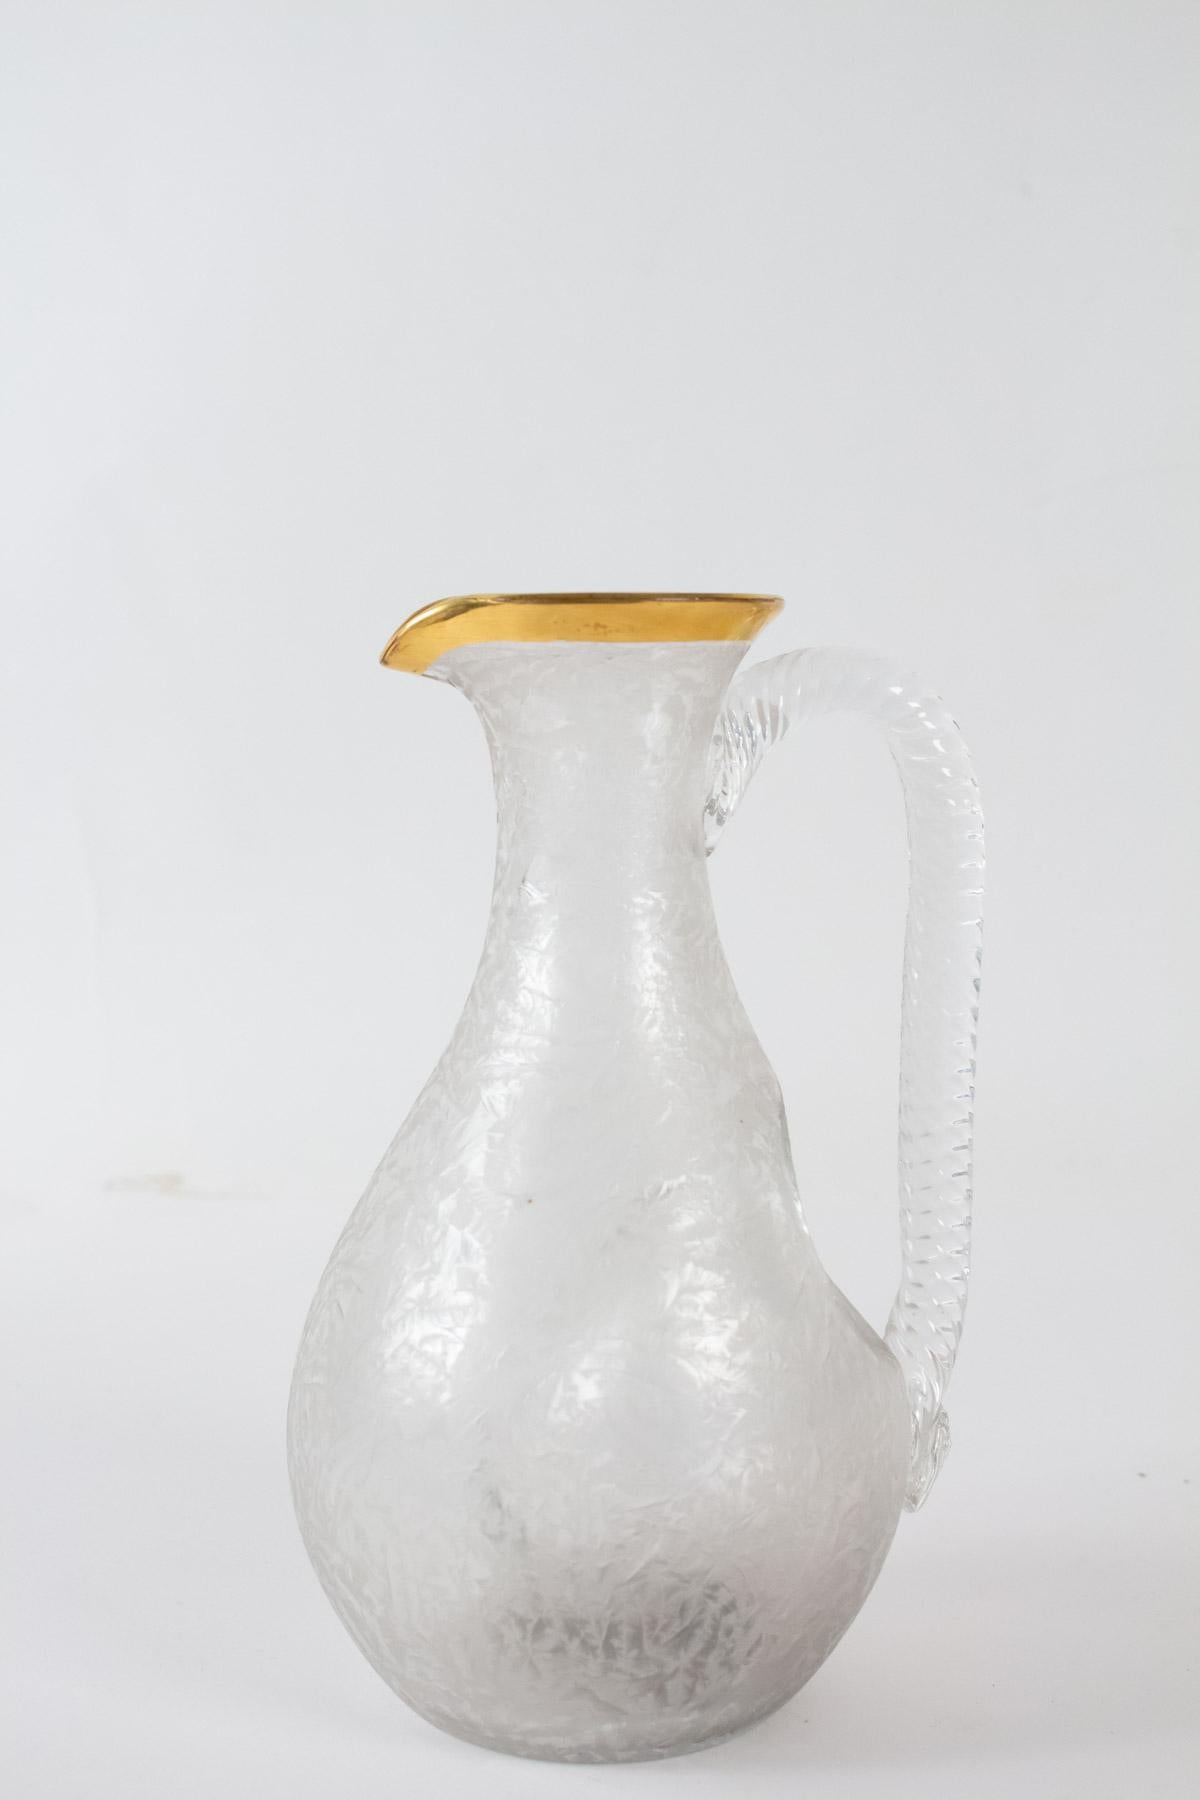 Engraved and gilded crystal carafe with ice cube tank, mid-20th century.
Measures: H 23cm, D 15cm.